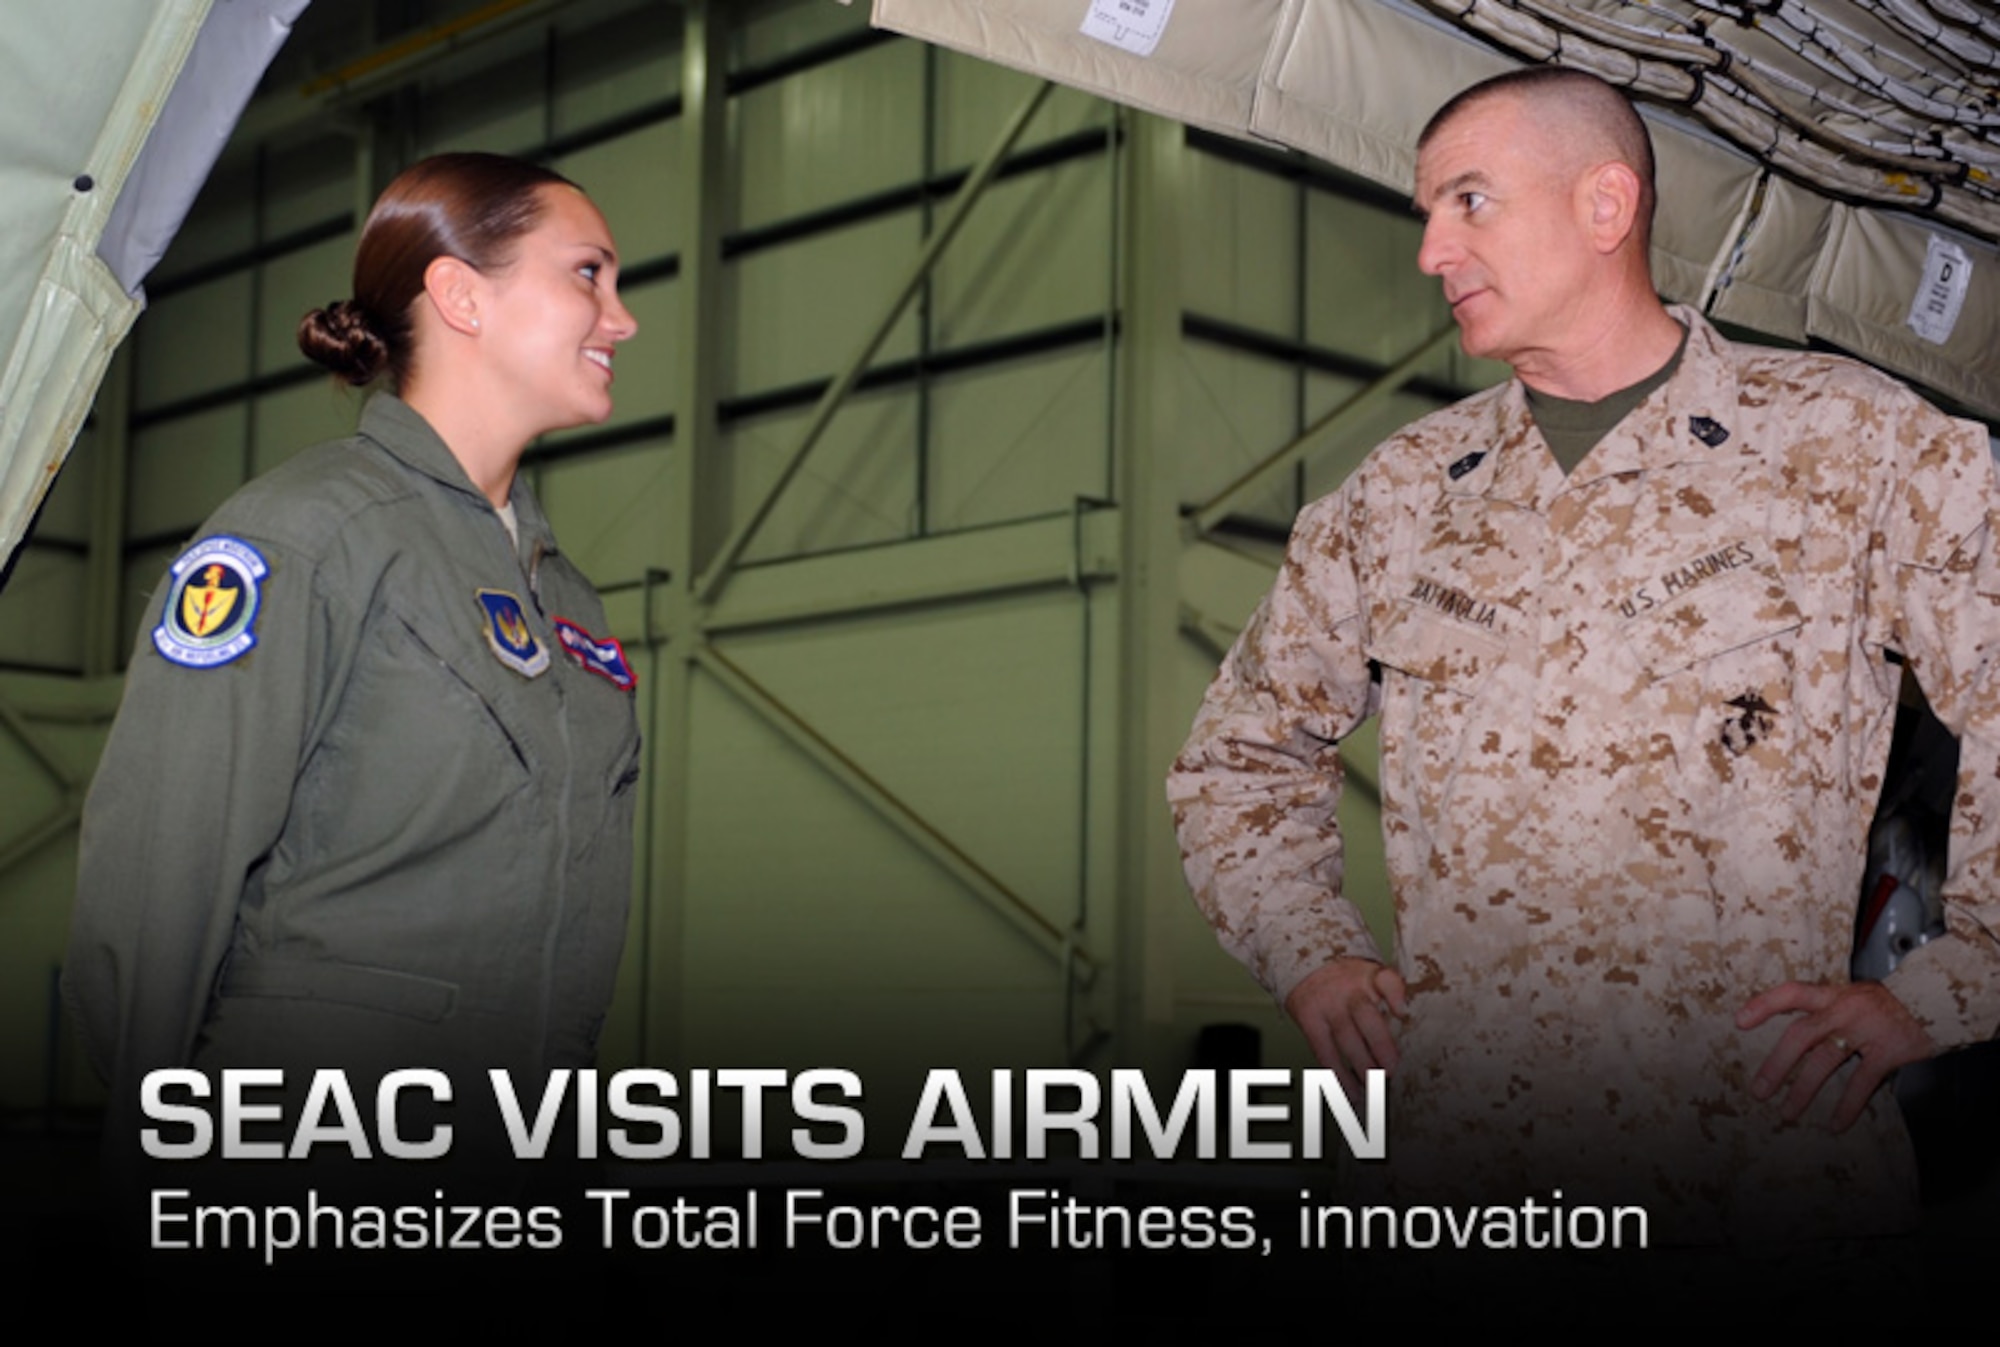 Senior Airman Amanda Ampey (left) meets Marine Corps Sgt. Maj. Bryan Battaglia before showing him the interior of a KC-135 Stratotanker June 20, 2013, at Hangar 814 during a tour of Royal Air Force Mildenhall, England. While on RAF Mildenhall, Battaglia also viewed 352nd Special Operations Group assets, and he addressed Airmen during a base town hall meeting. Battaglia is the senior enlisted advisor to the chairman of the Joint Chiefs of Staff. Ampey is a 351st Air Refueling Squadron boom operator. (U.S. Air Force photo/Airman 1st Class Preston Webb) 